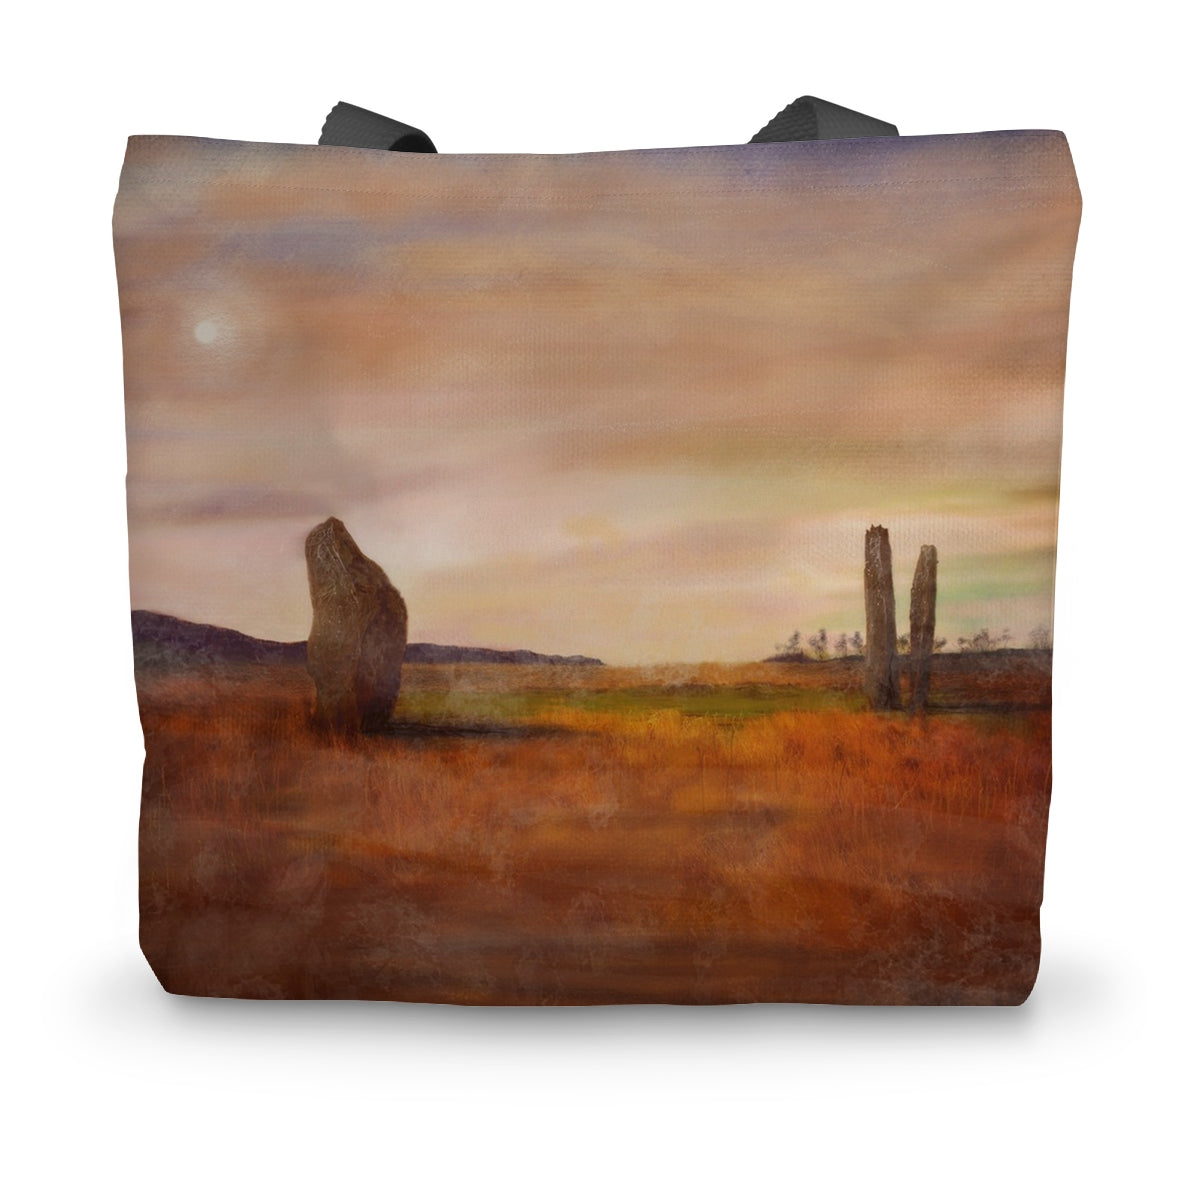 Machrie Moor Arran Art Gifts Canvas Tote Bag-Bags-Arran Art Gallery-14"x18.5"-Paintings, Prints, Homeware, Art Gifts From Scotland By Scottish Artist Kevin Hunter